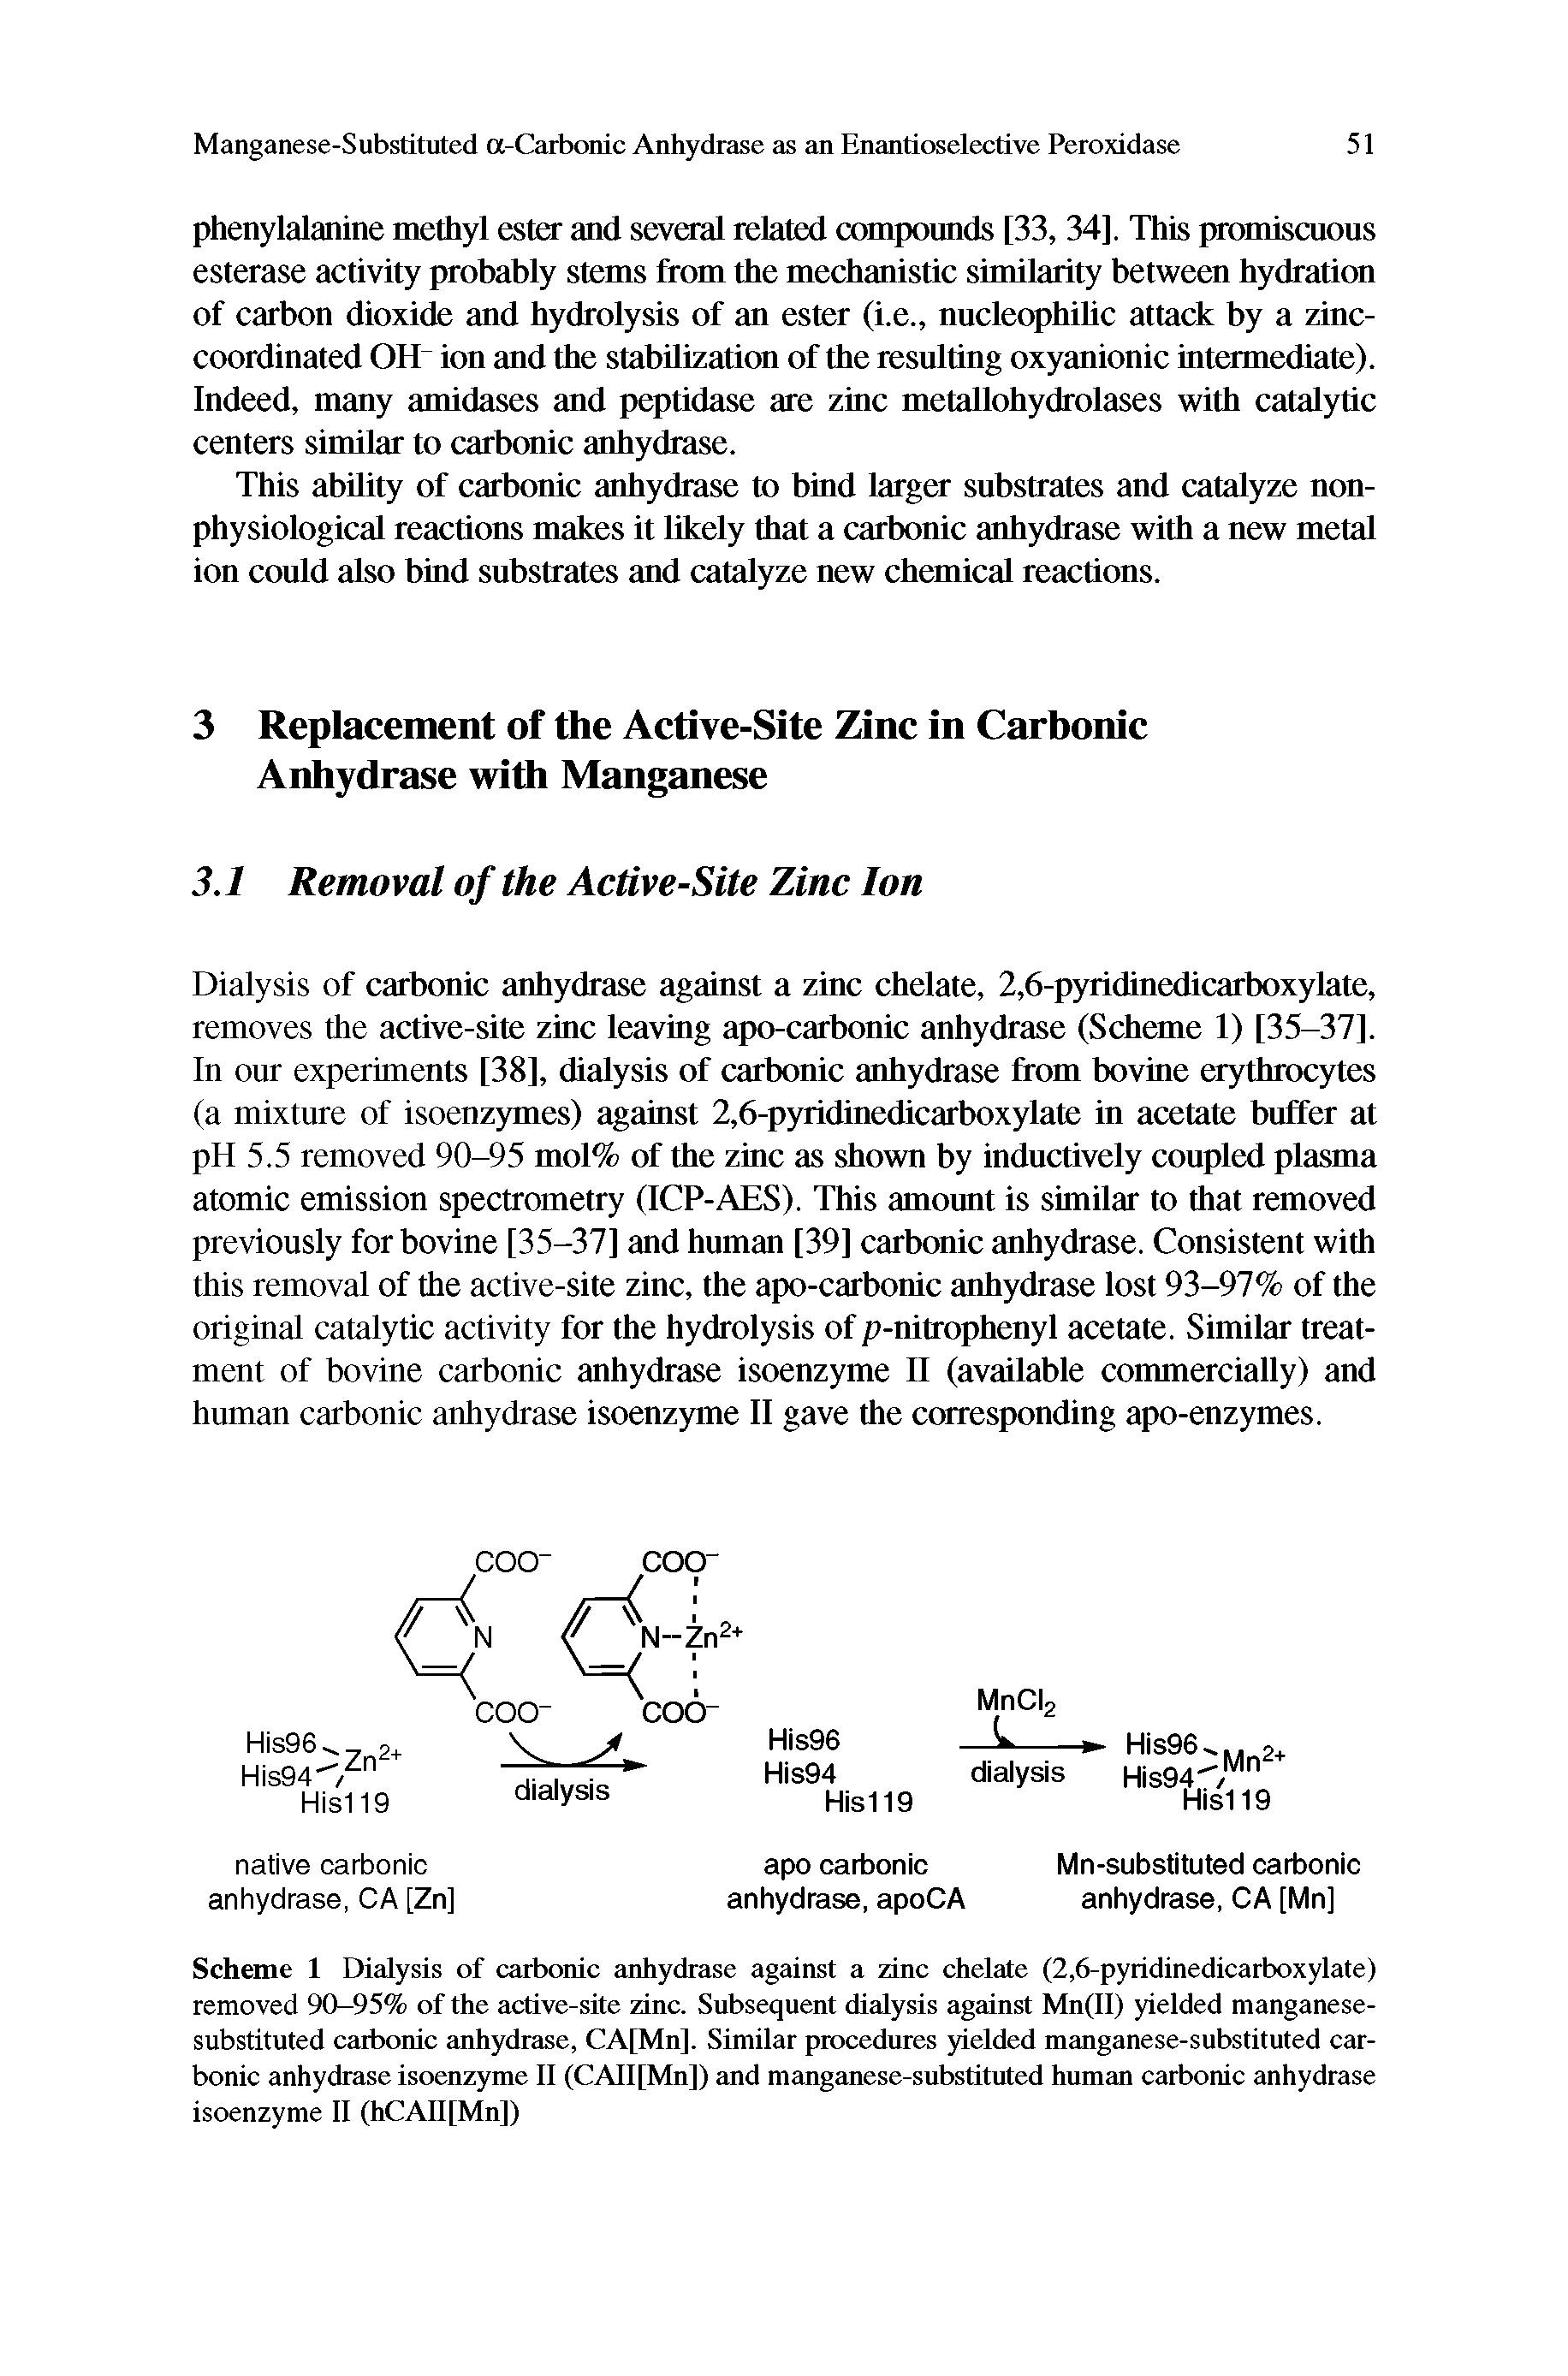 Scheme 1 Dialysis of carbonic anhydrase against a zinc chelate (2,6-pyridinedicarboxylate) removed 90-95% of the active-site zinc. Subsequent dialysis against Mn(ll) yielded manganese-substituted carbonic anhydrase, CA[Mn]. Similar procedures yielded manganese-substituted carbonic anhydrase isoenzyme 11 (CAll[Mn]) and manganese-substituted human carbonic anhydrase isoenzyme II (hCAII[Mn])...